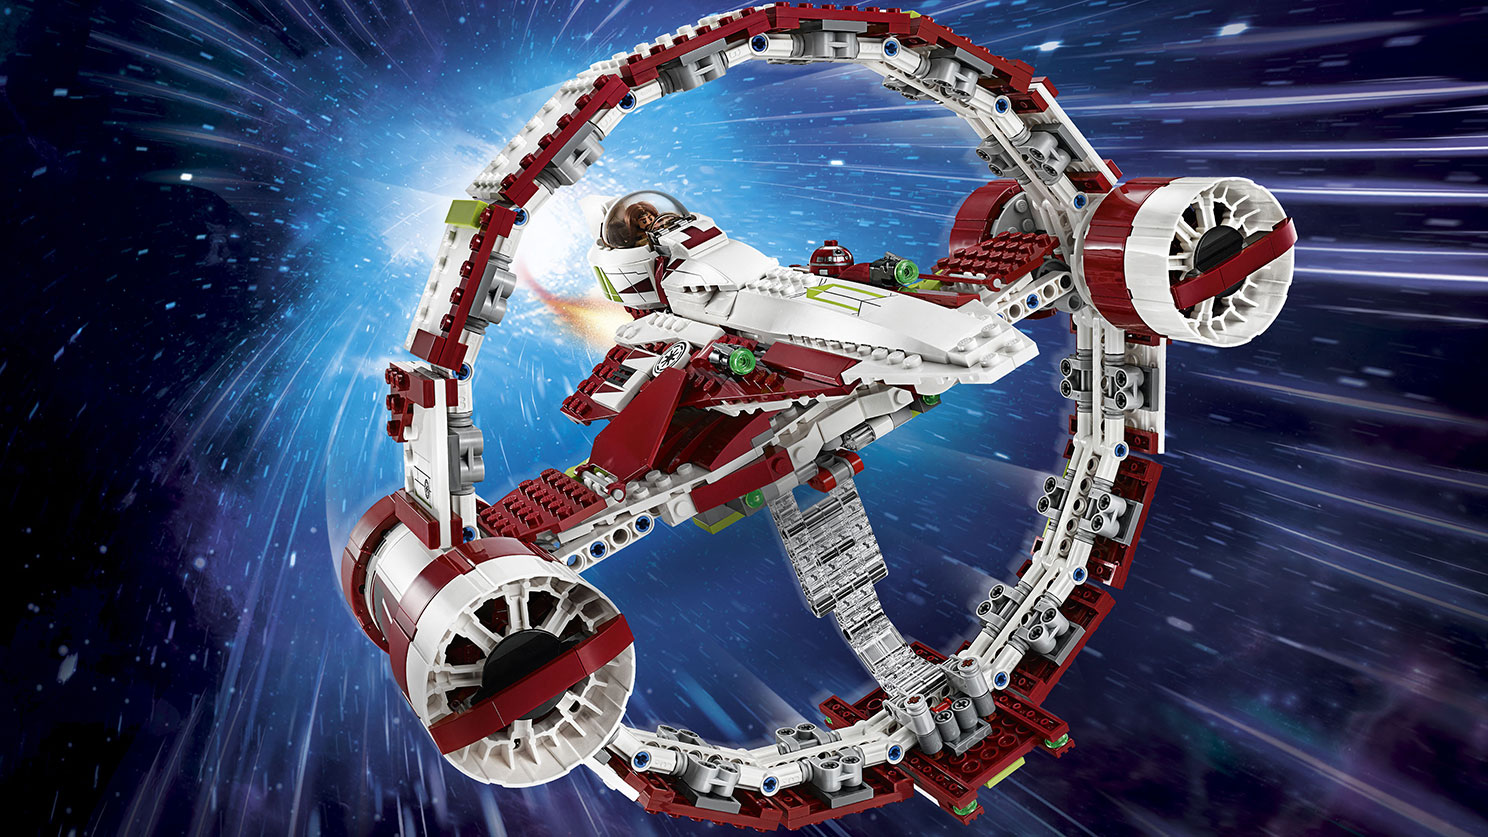 Jedi Starfighter™ With Hyperdrive 75191 - Star Wars™ LEGO.com for kids